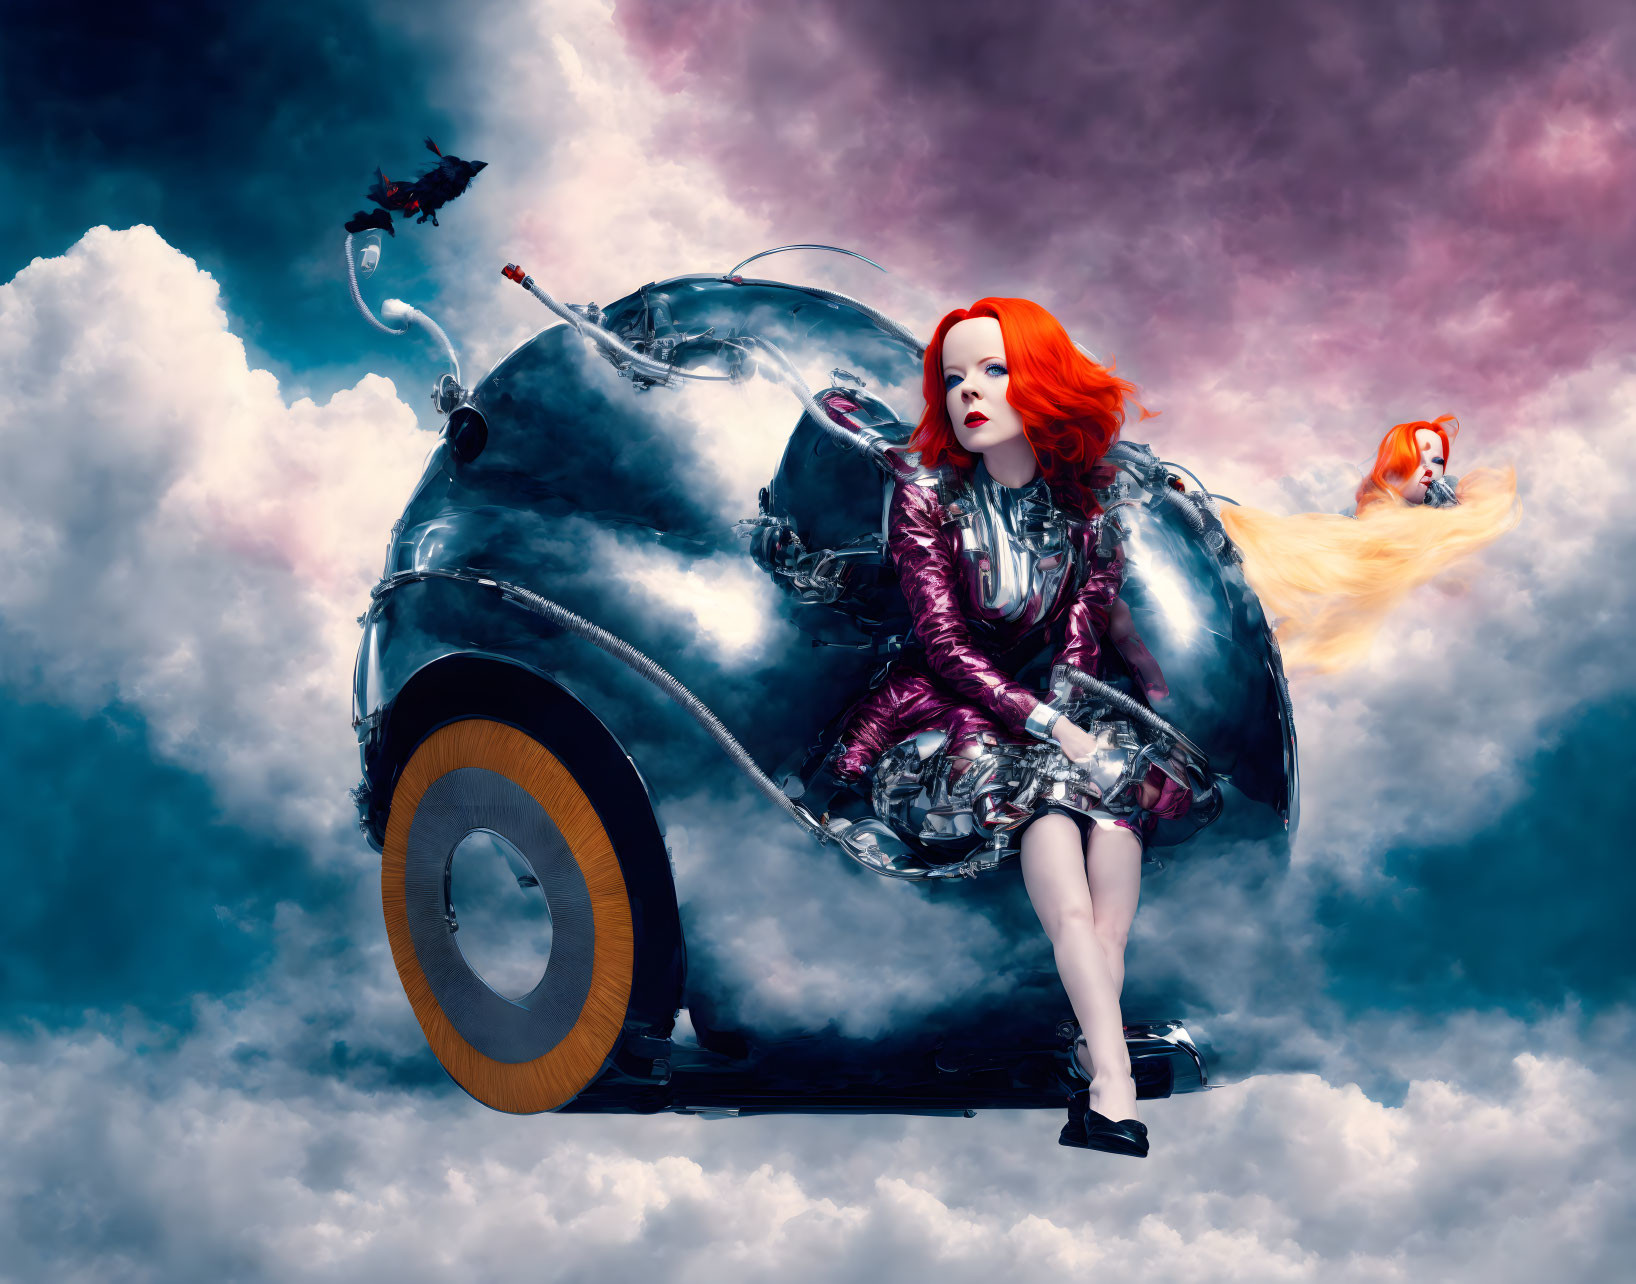 Red-haired woman in metallic outfit on futuristic motorcycle with fiery bird and dark sky.